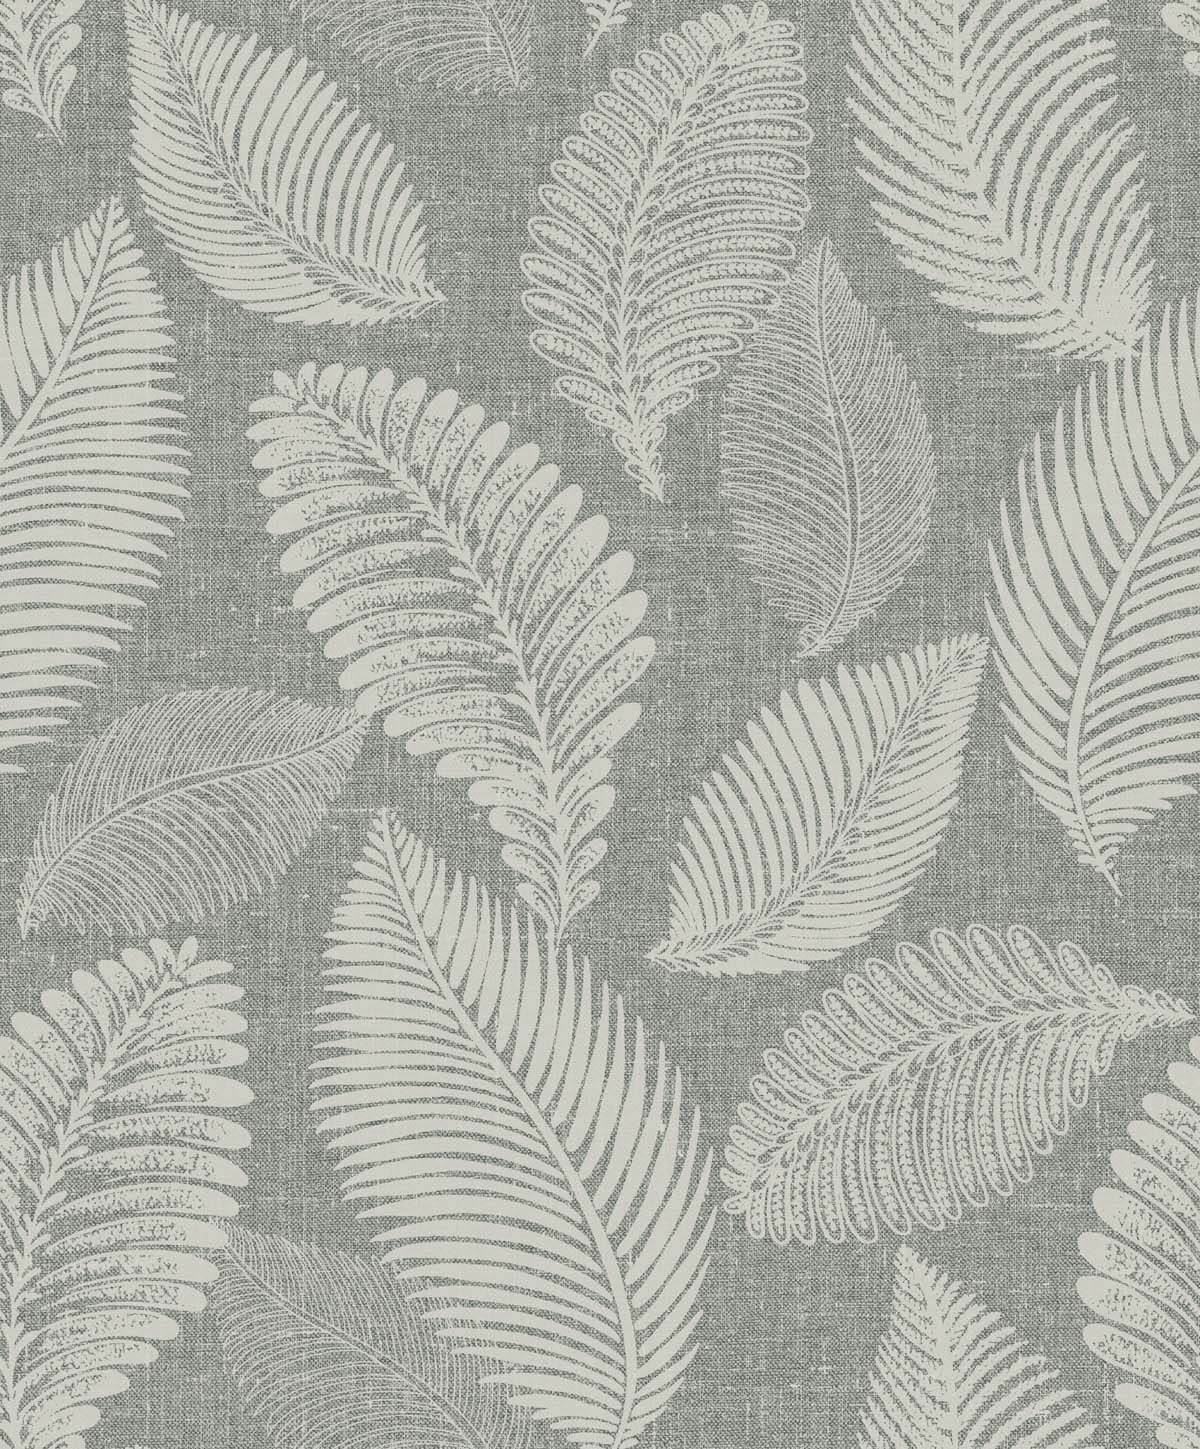 Seabrook White Heron Tossed Leaves Wallpaper - Charcoal Linen